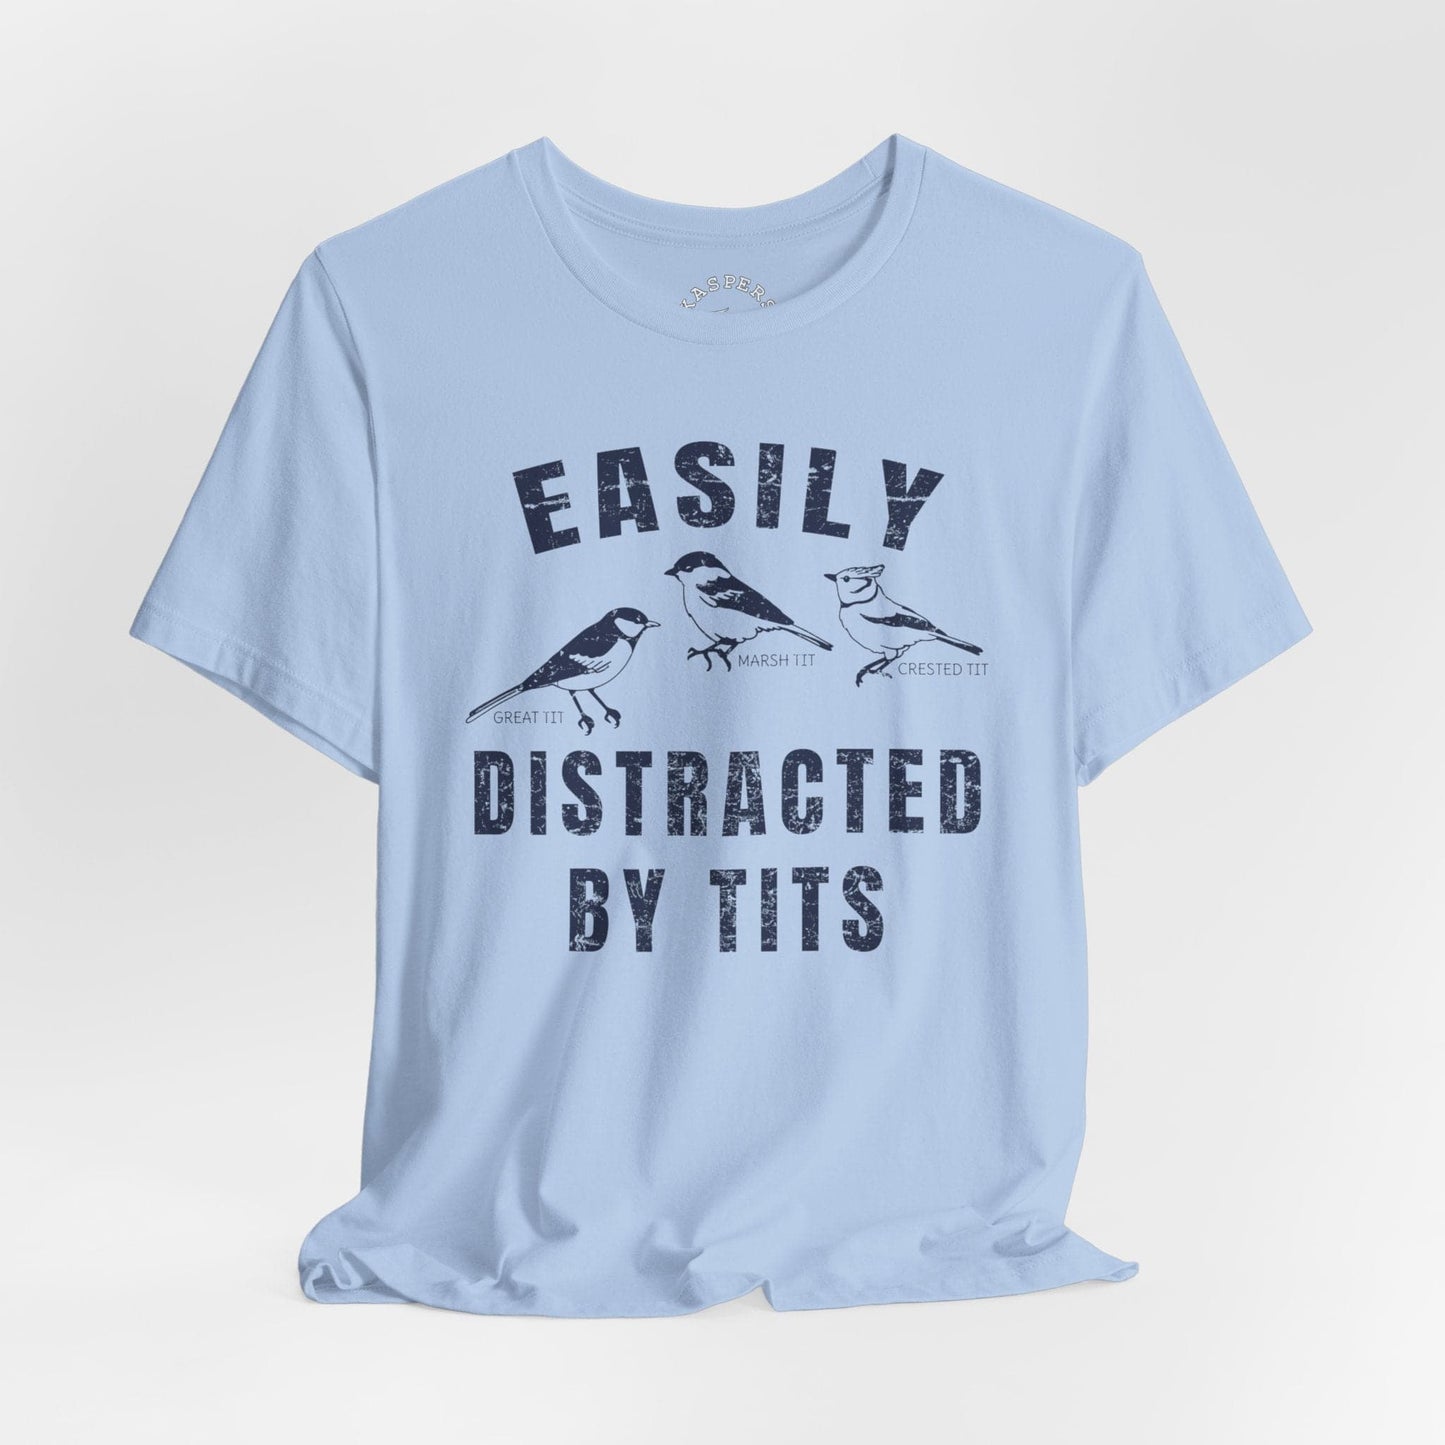 Easily Distracted By Tits T-Shirt